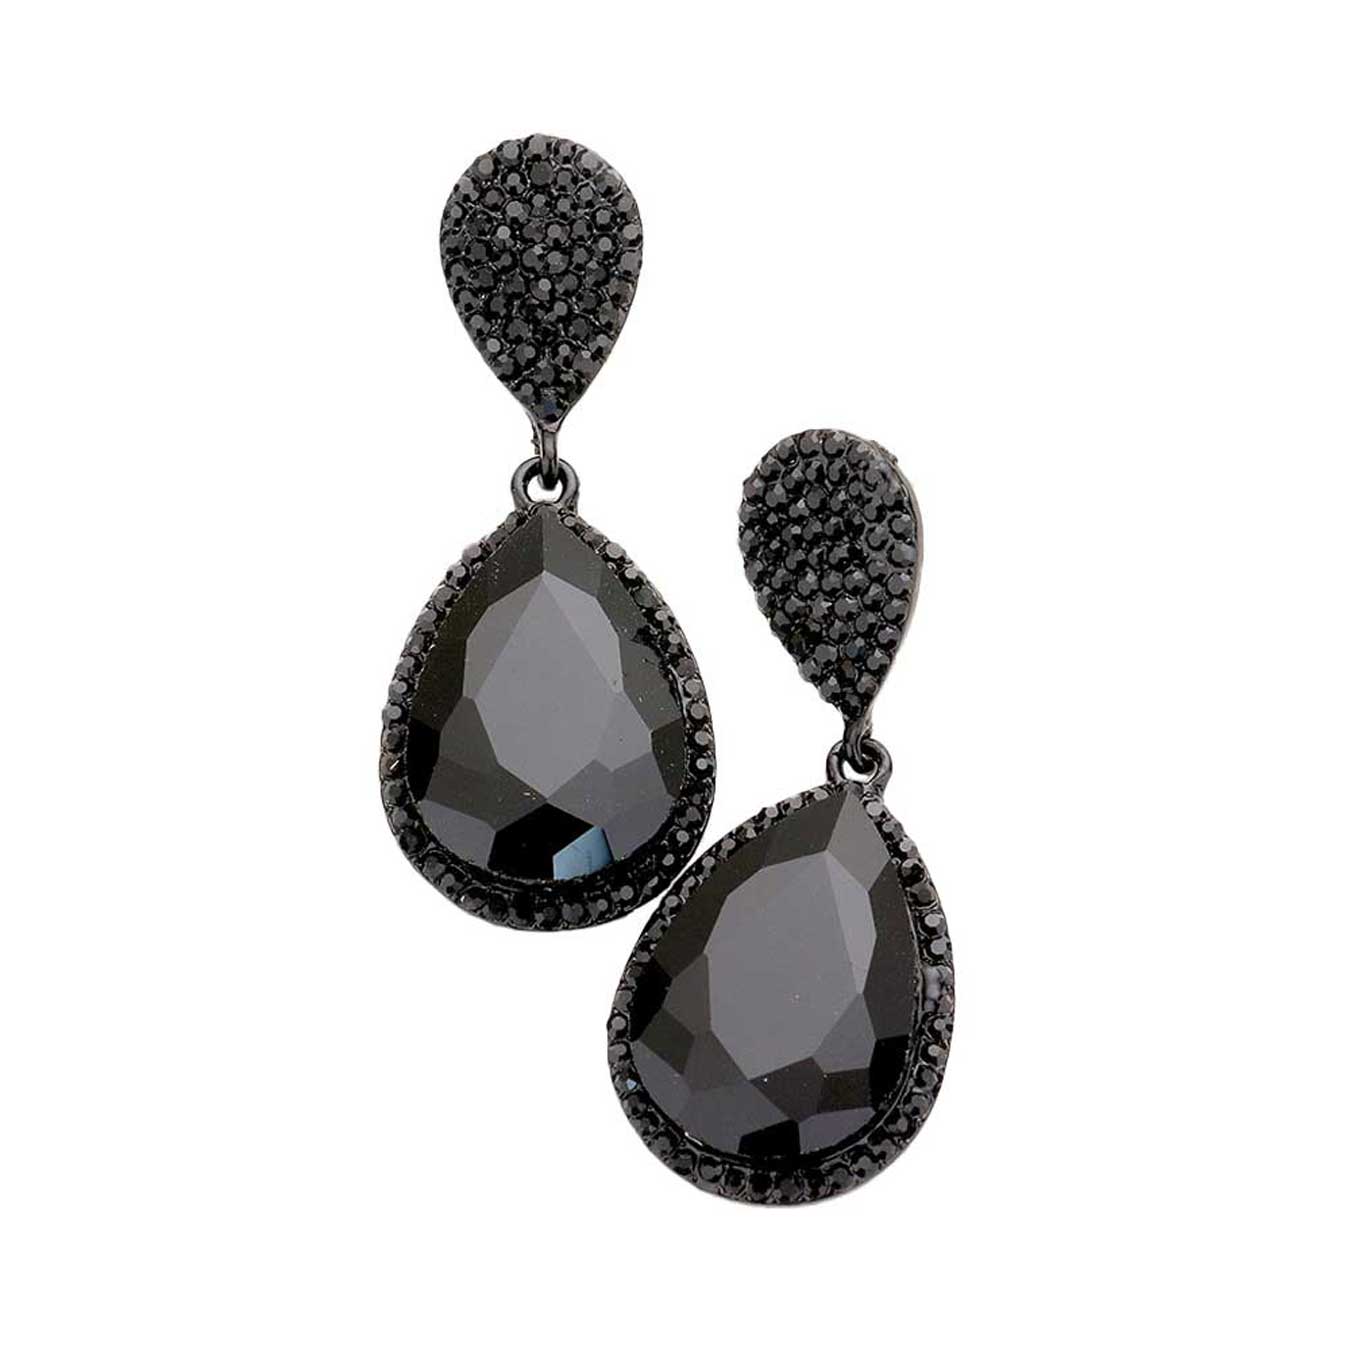 Jet Black Glass Crystal Teardrop Rhinestone Trim Evening Earrings, put on a pop of color to complete your ensemble. Beautifully crafted design adds a gorgeous glow to any outfit. Perfect jewelry gift to expand a woman's fashion wardrobe with a modern, on trend style. Perfect for Birthday Gift, Anniversary Gift, Mother's Day Gift, Graduation Gift, Valentine's Day Gift.